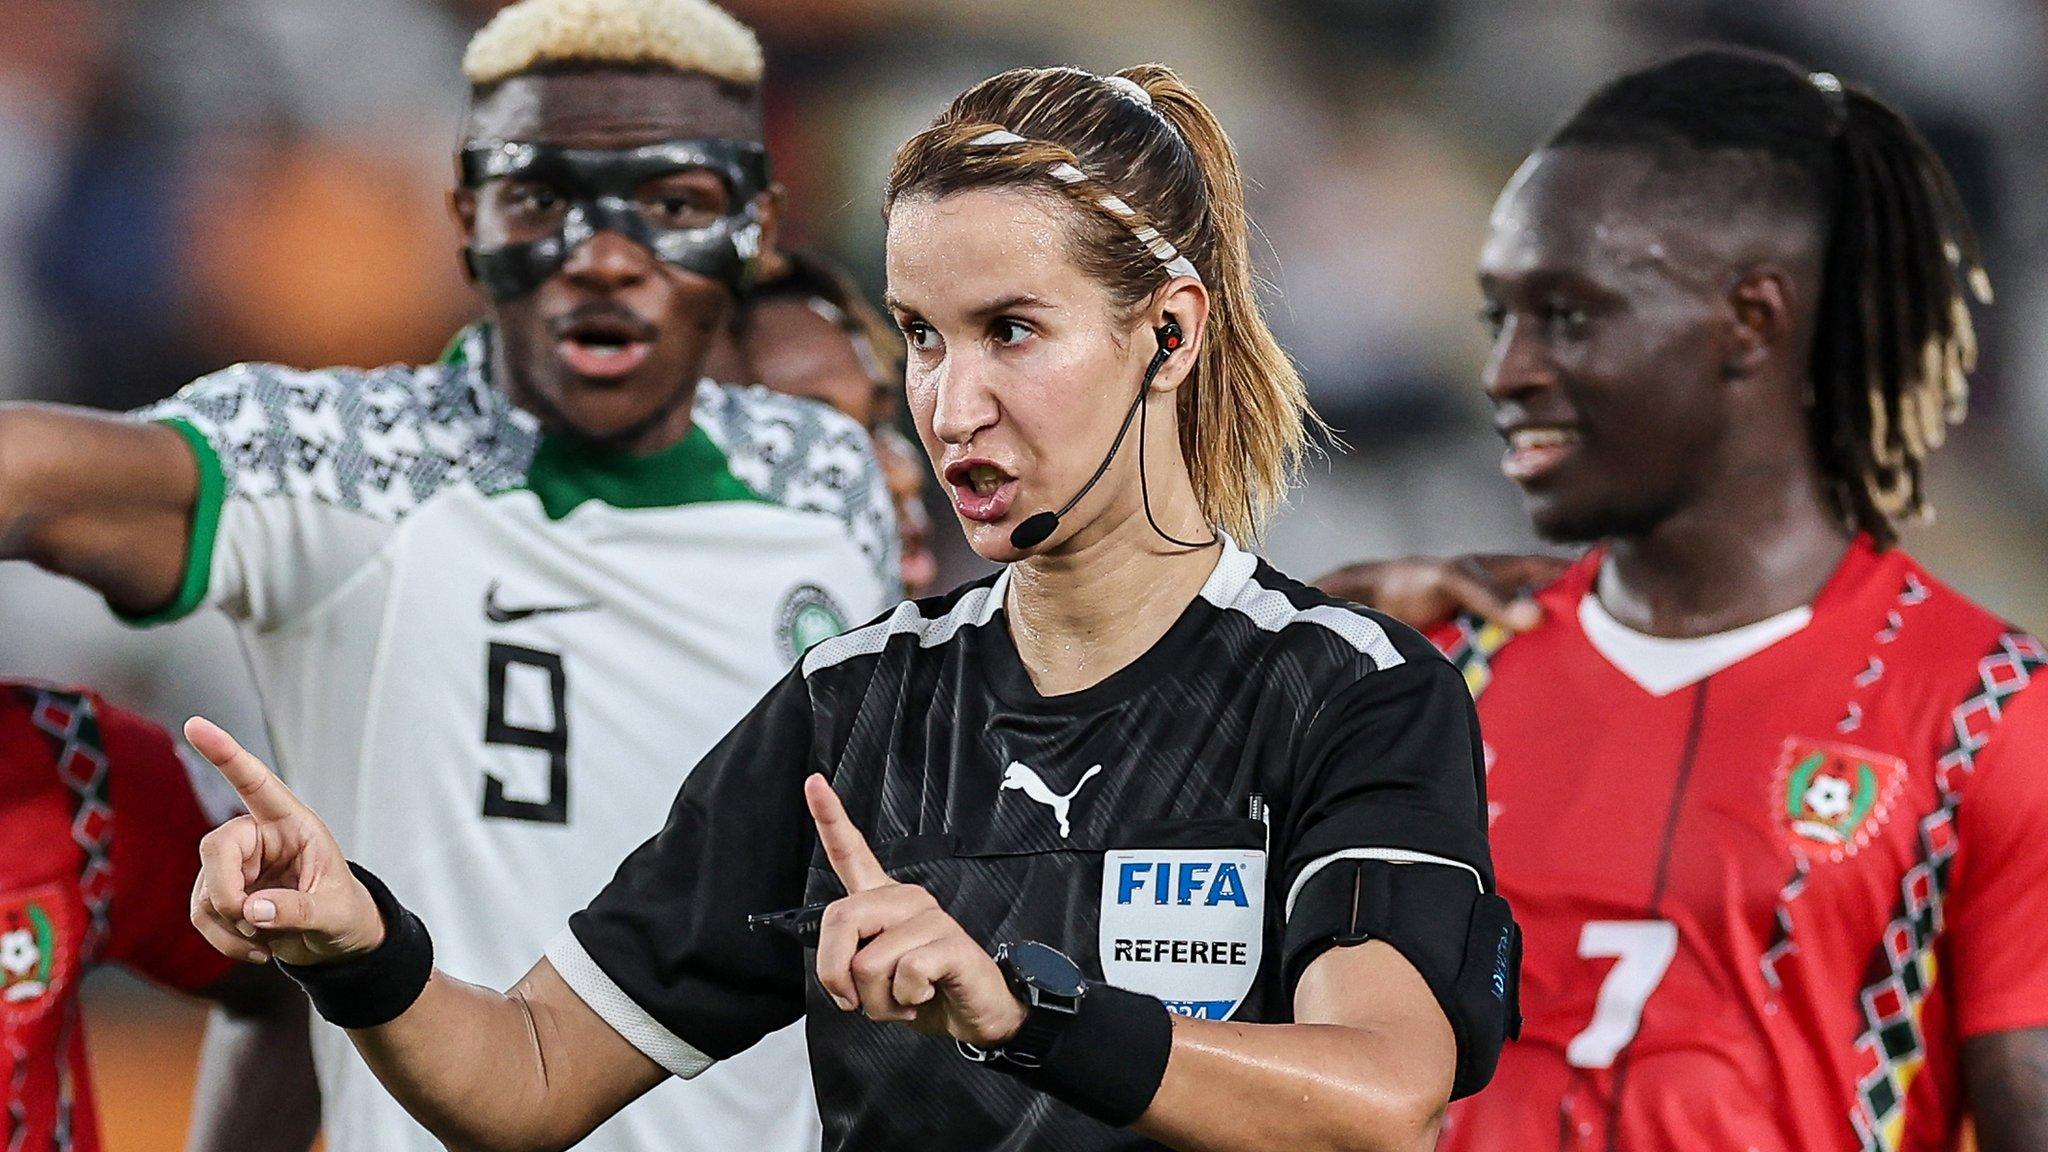 The Moroccan referee who has overcome cultural barriers and gender stereotypes to make history at AFCON 2023 ⚽ 🌍